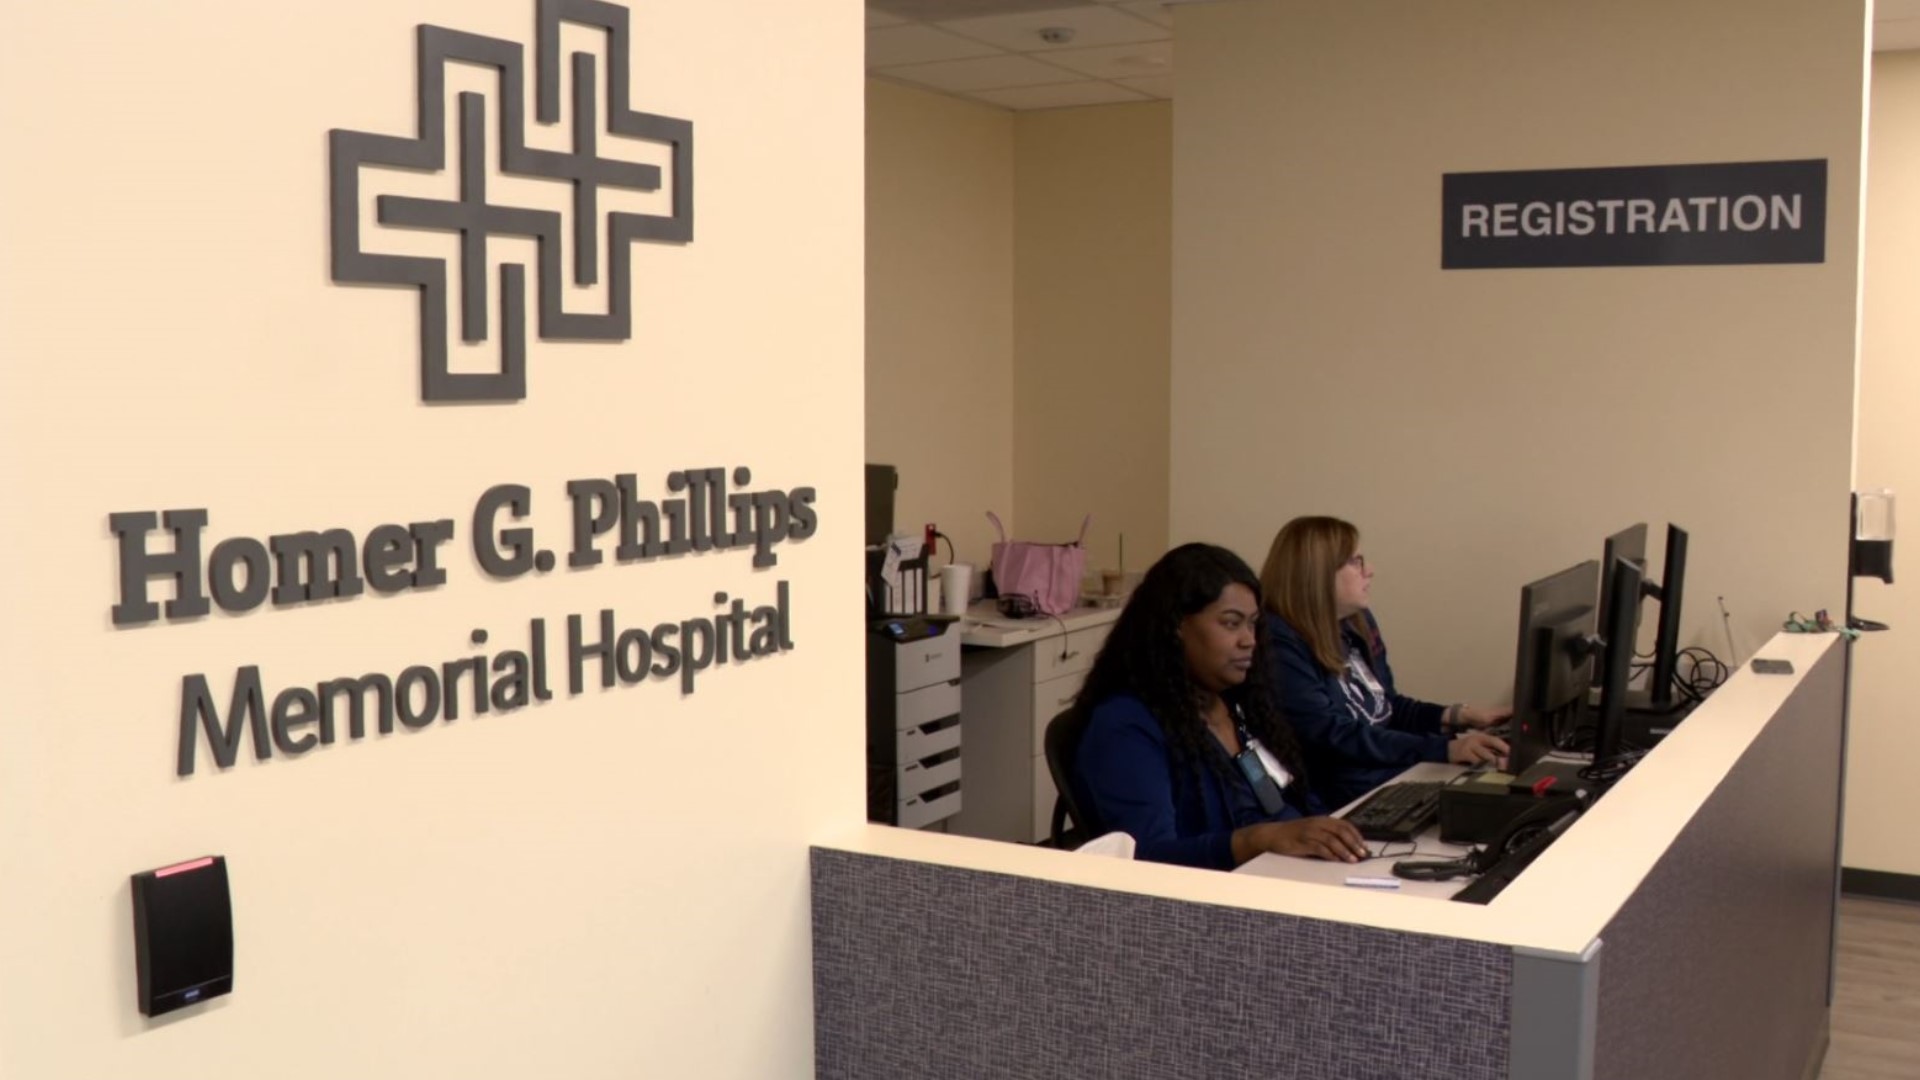 A new hospital with a historic name has opened in north St. Louis. She takes us inside the facility and inside the debate over the hospital's name.